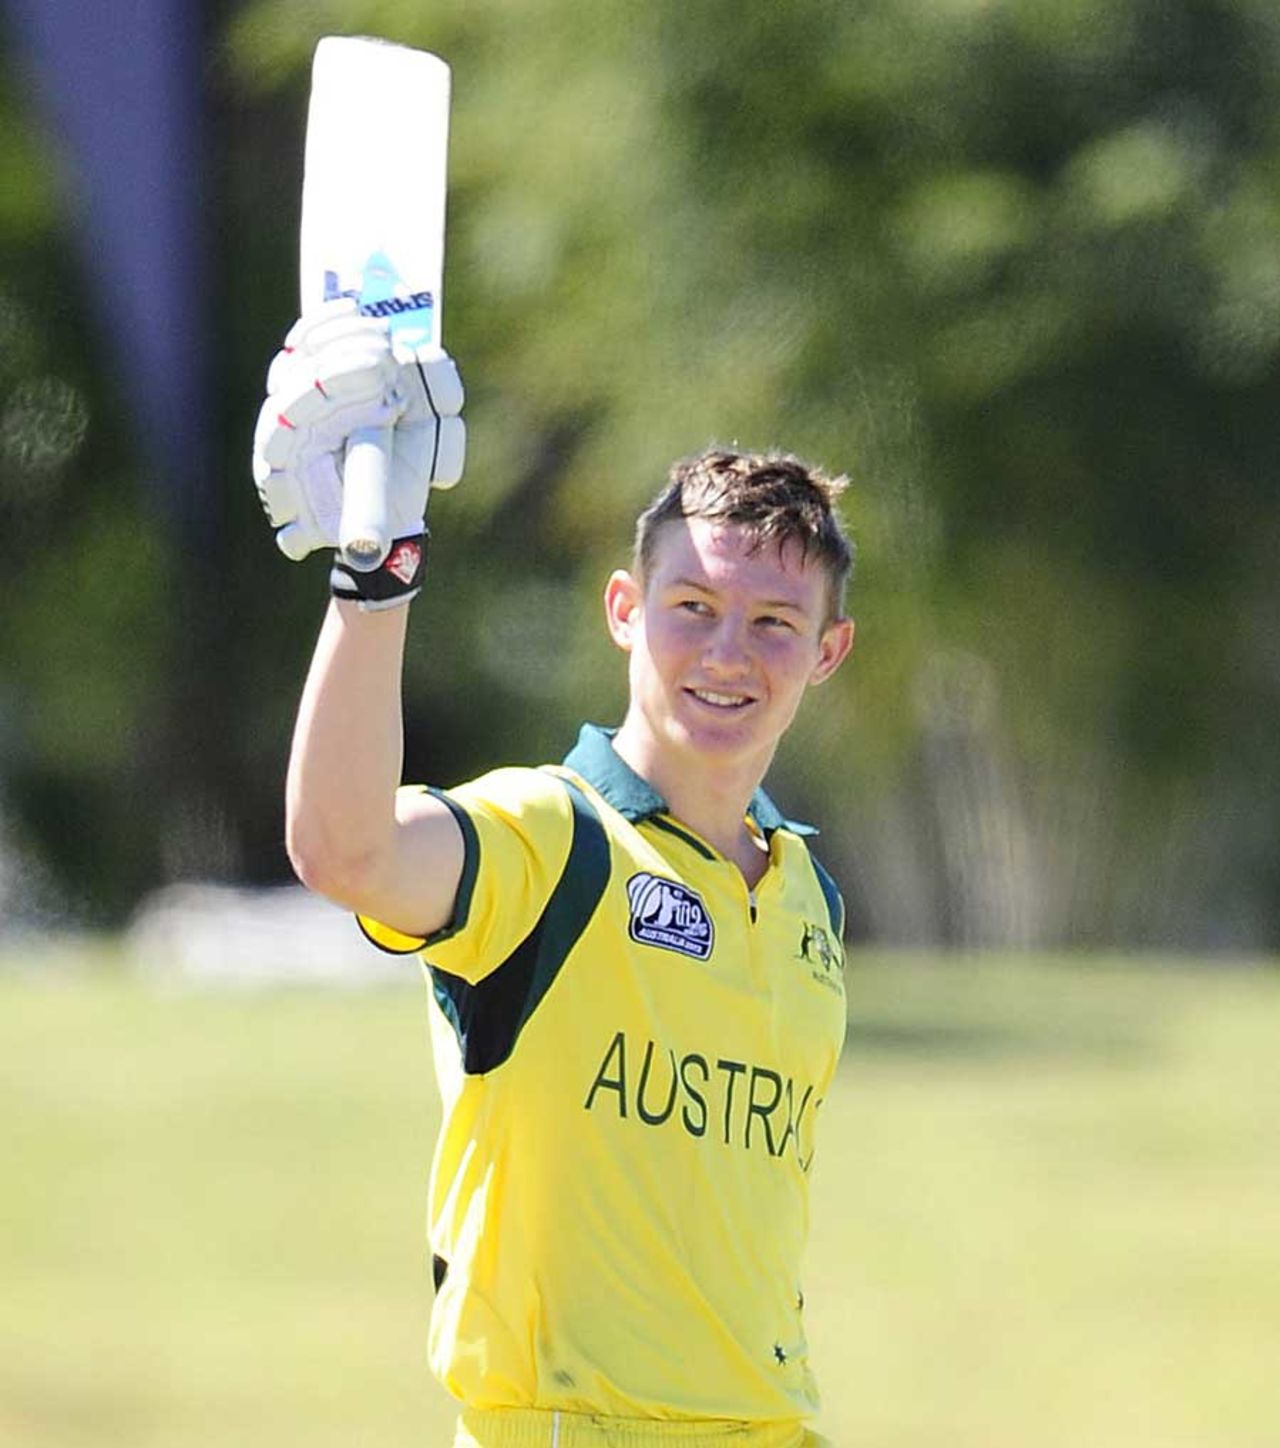 Cameron Bancroft celebrates his century, Australia v Nepal, Group A, ICC Under-19 World Cup 2012, Townsville, August 13, 2012